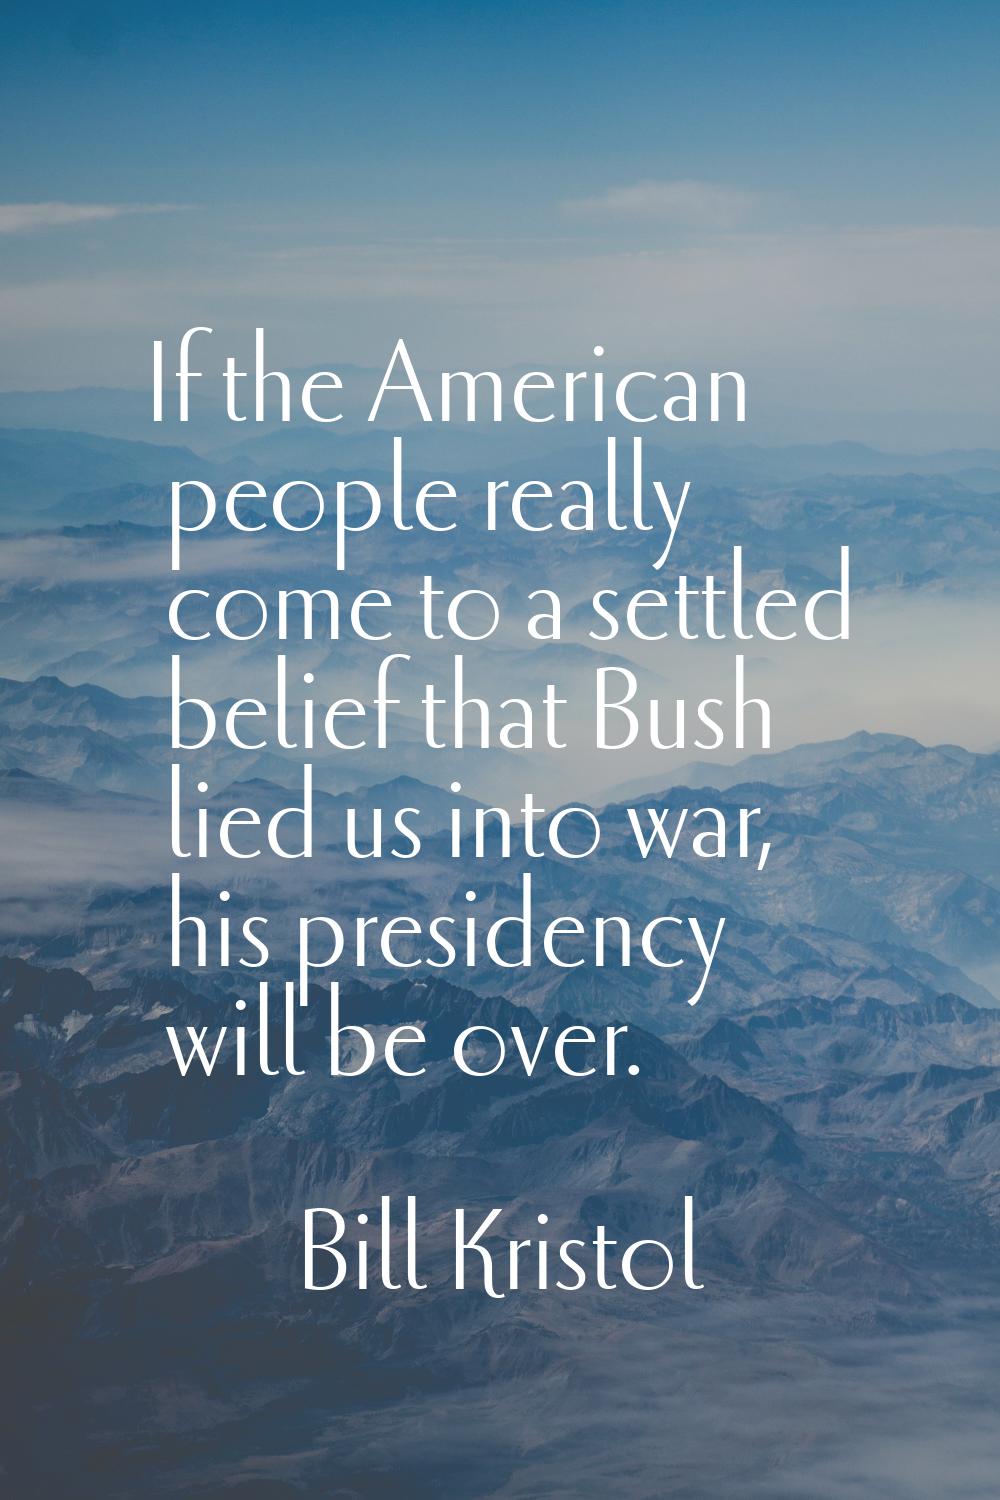 If the American people really come to a settled belief that Bush lied us into war, his presidency w